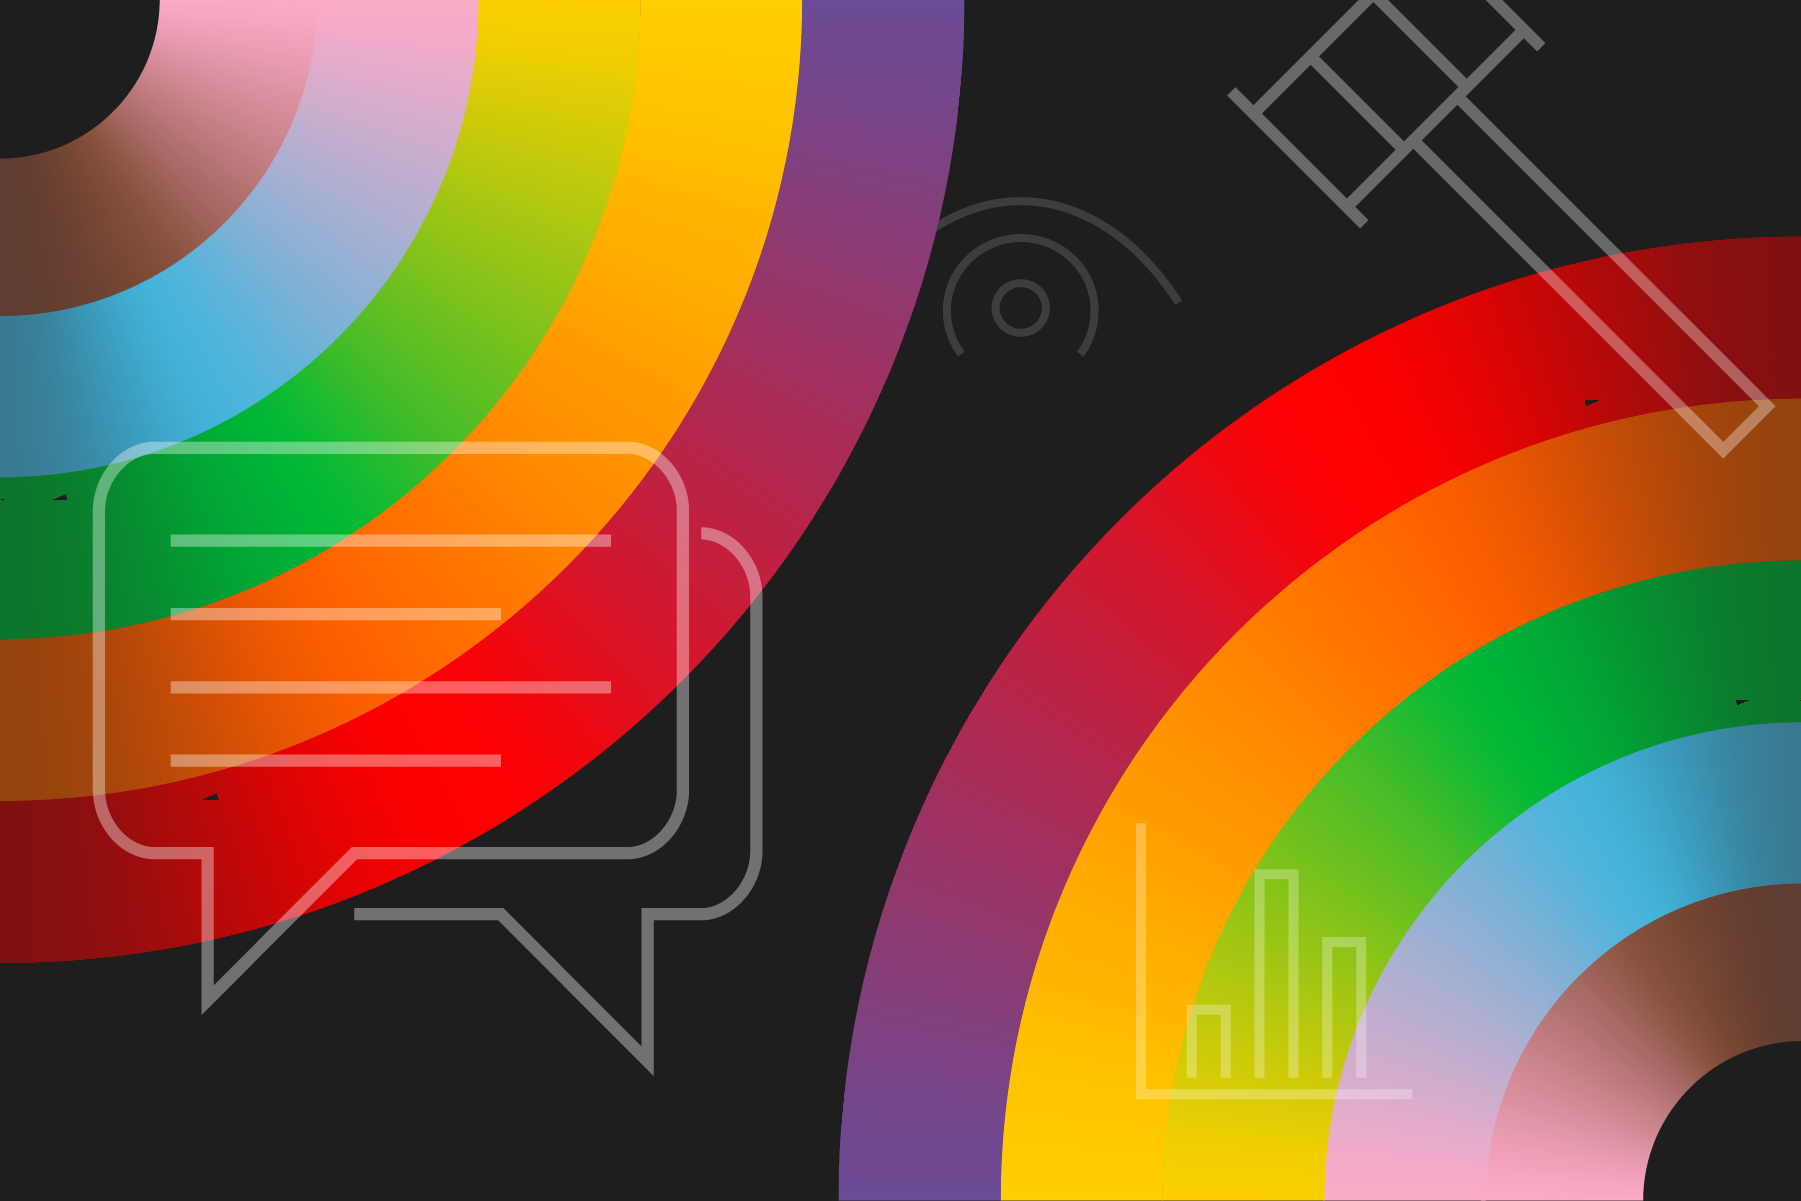 Pride Month Editor’s Note: Addressing Bias Against the LGBTQ+ Community